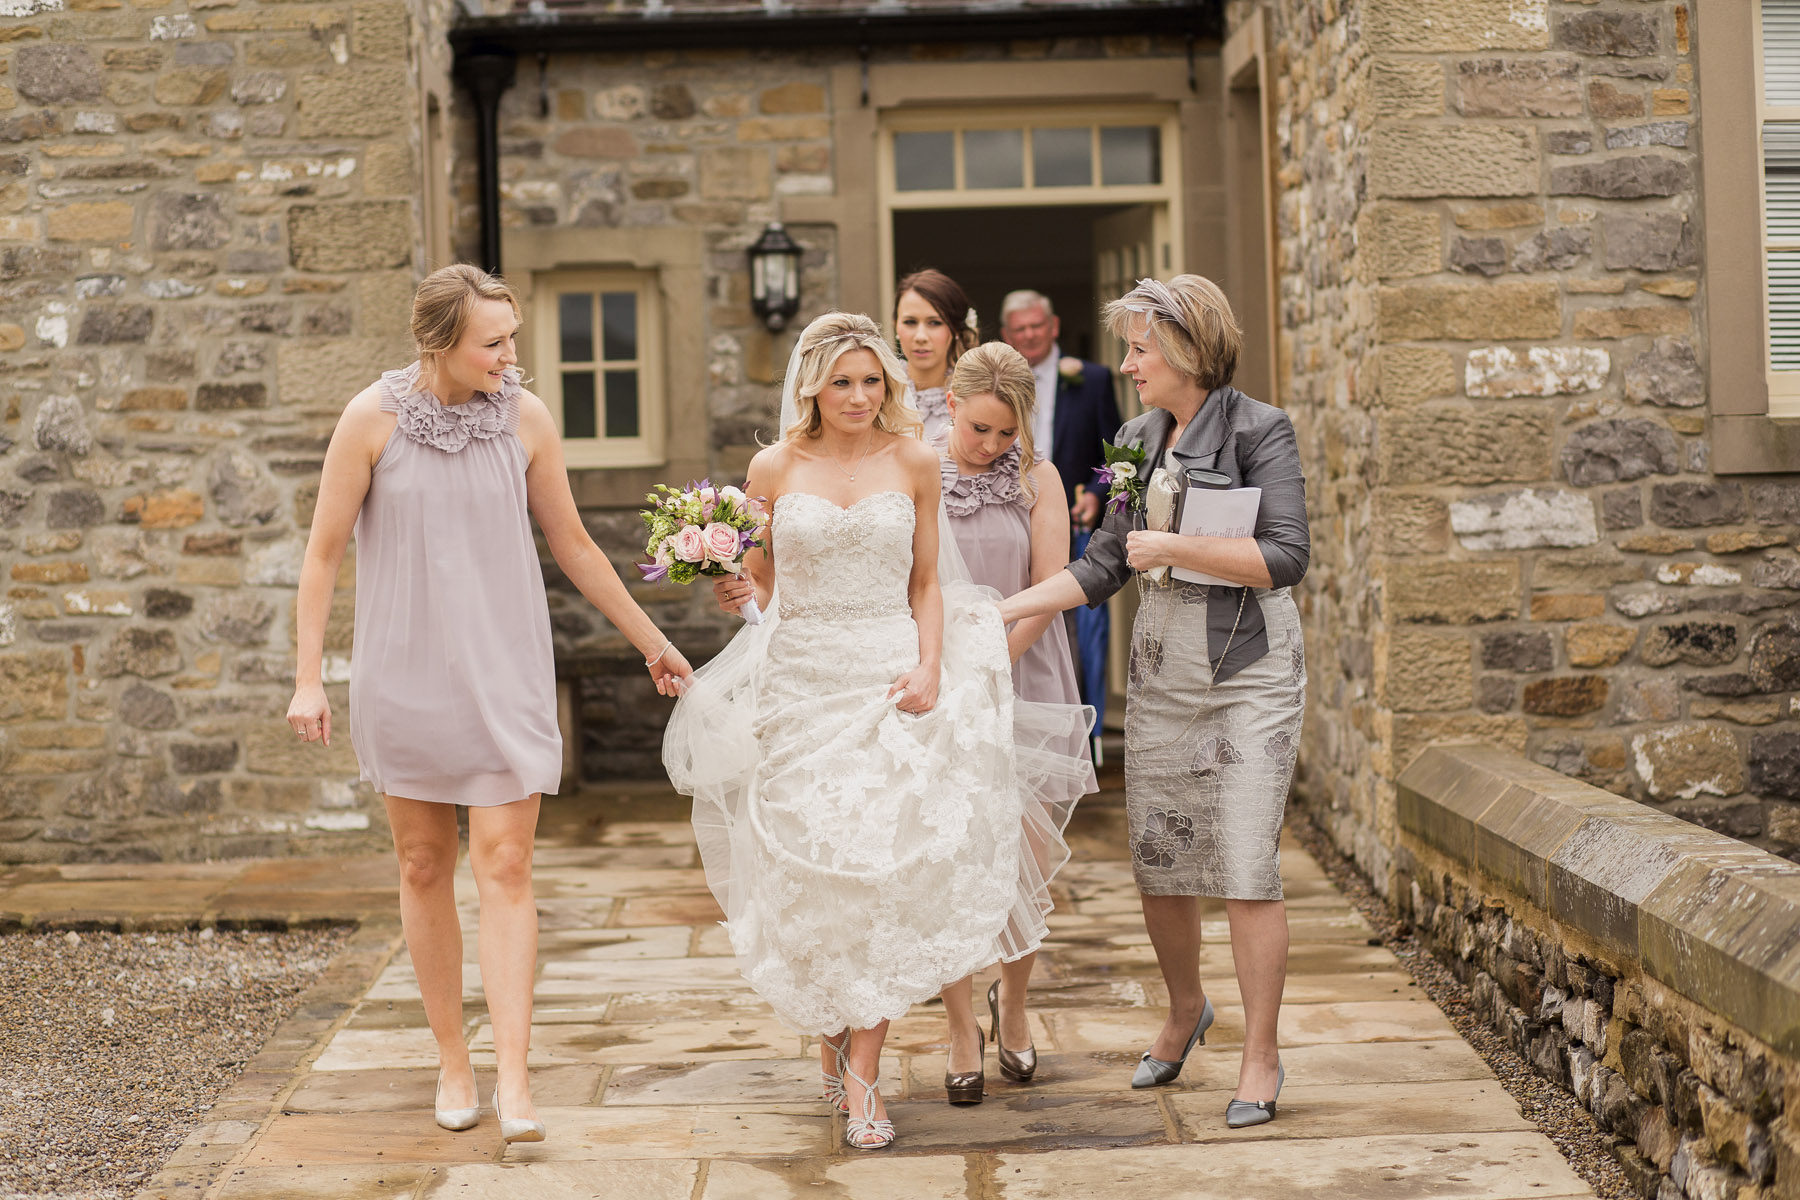 Harriet and Martin's wedding at Bolton Abbey church and reception at Utopia within the Broughton Hall estate near Skipton.